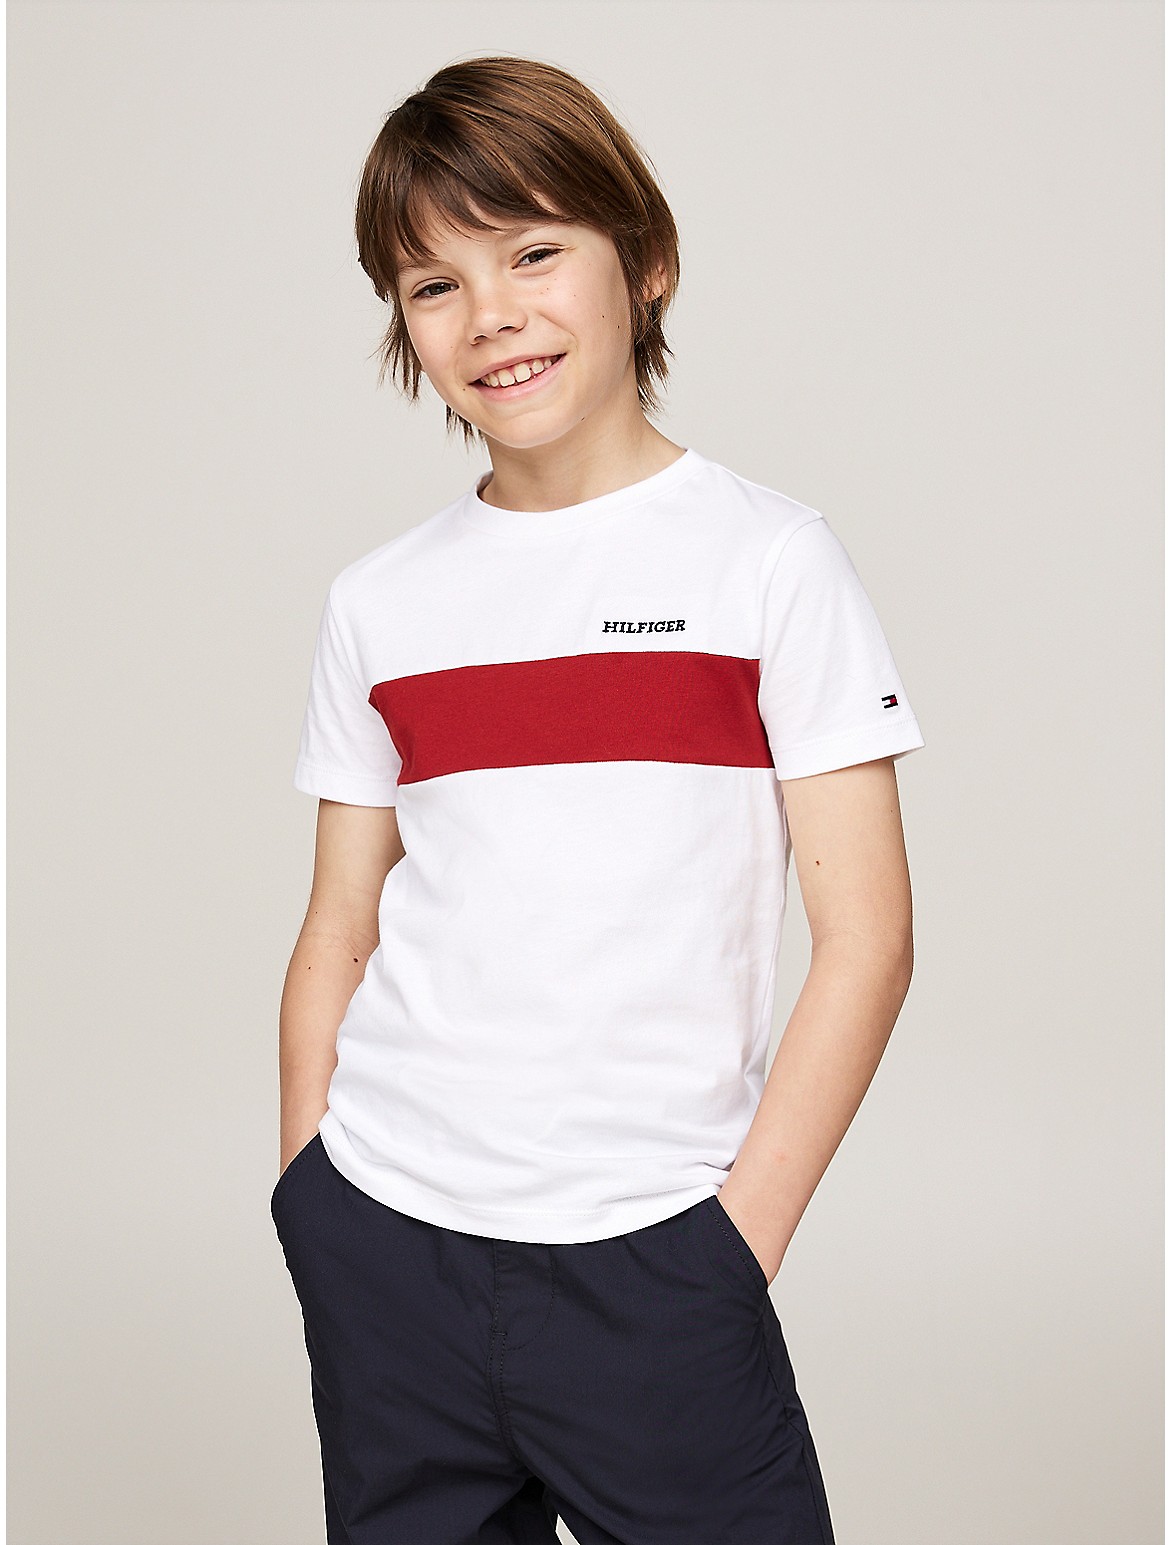 Tommy Hilfiger Boys' Kids' Embroidered Colorblock T-Shirt